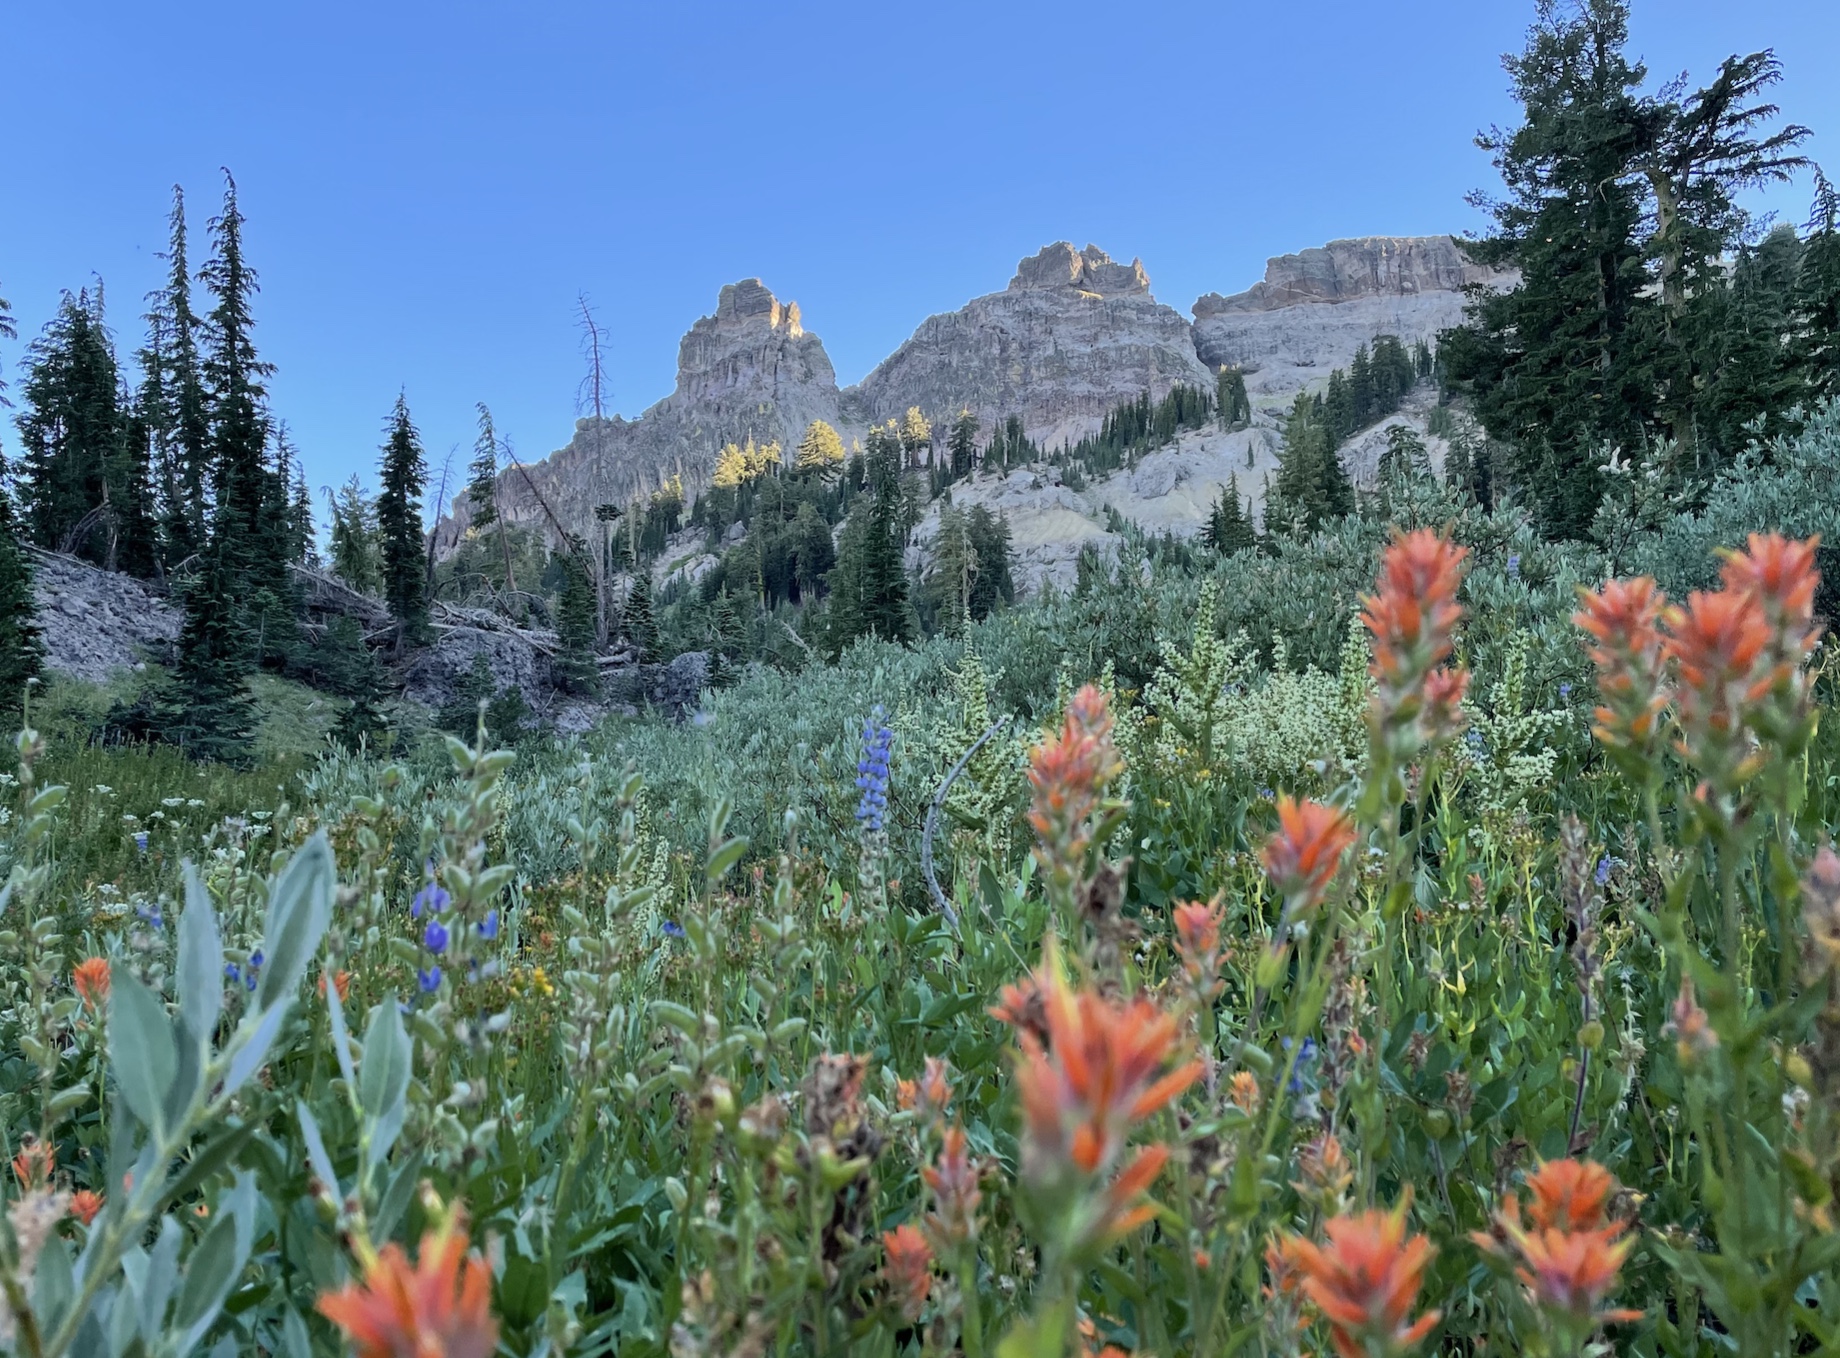 Different view of Castle Peak, from the north side. Really nice wildflowers on this route.